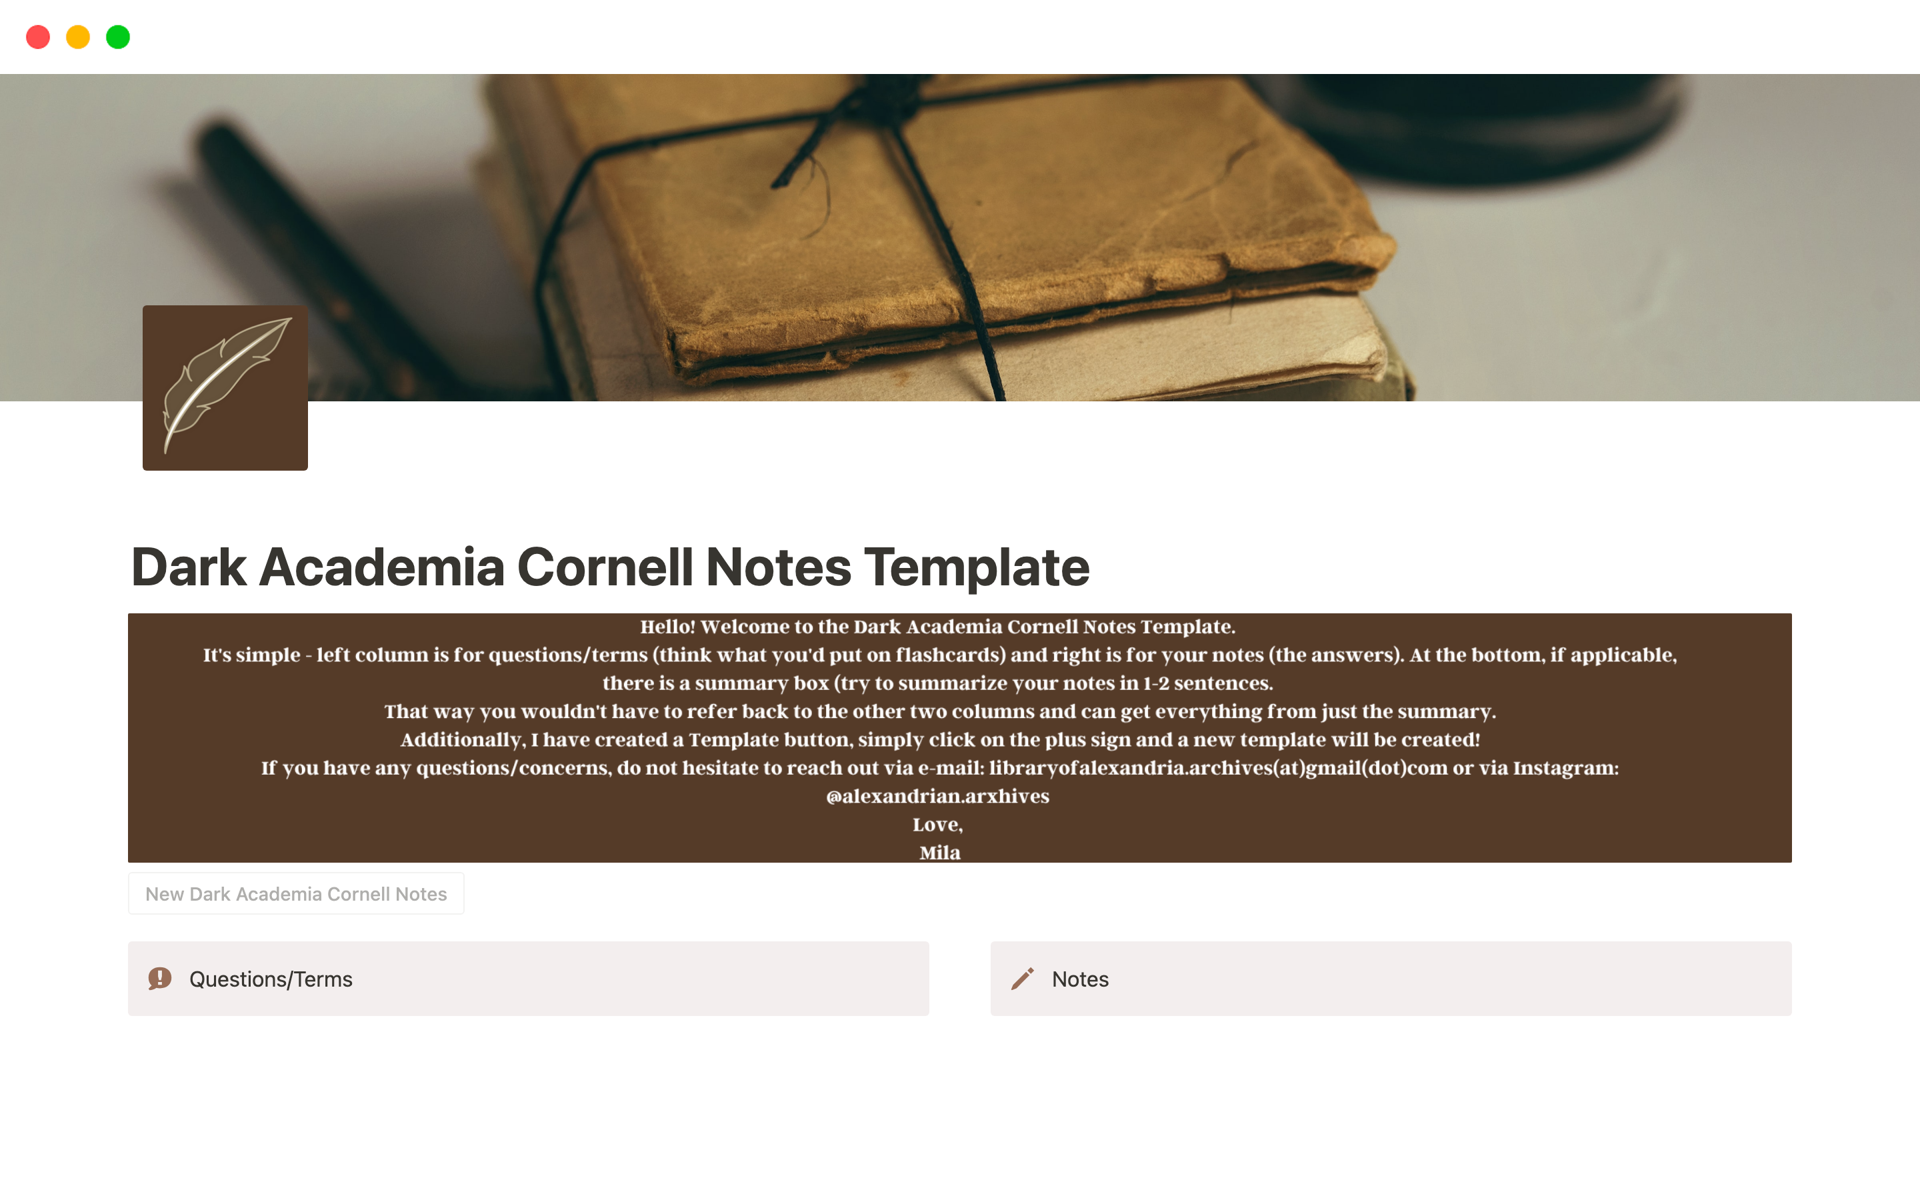 Organize your notes using the world-famous Cornell Notes method